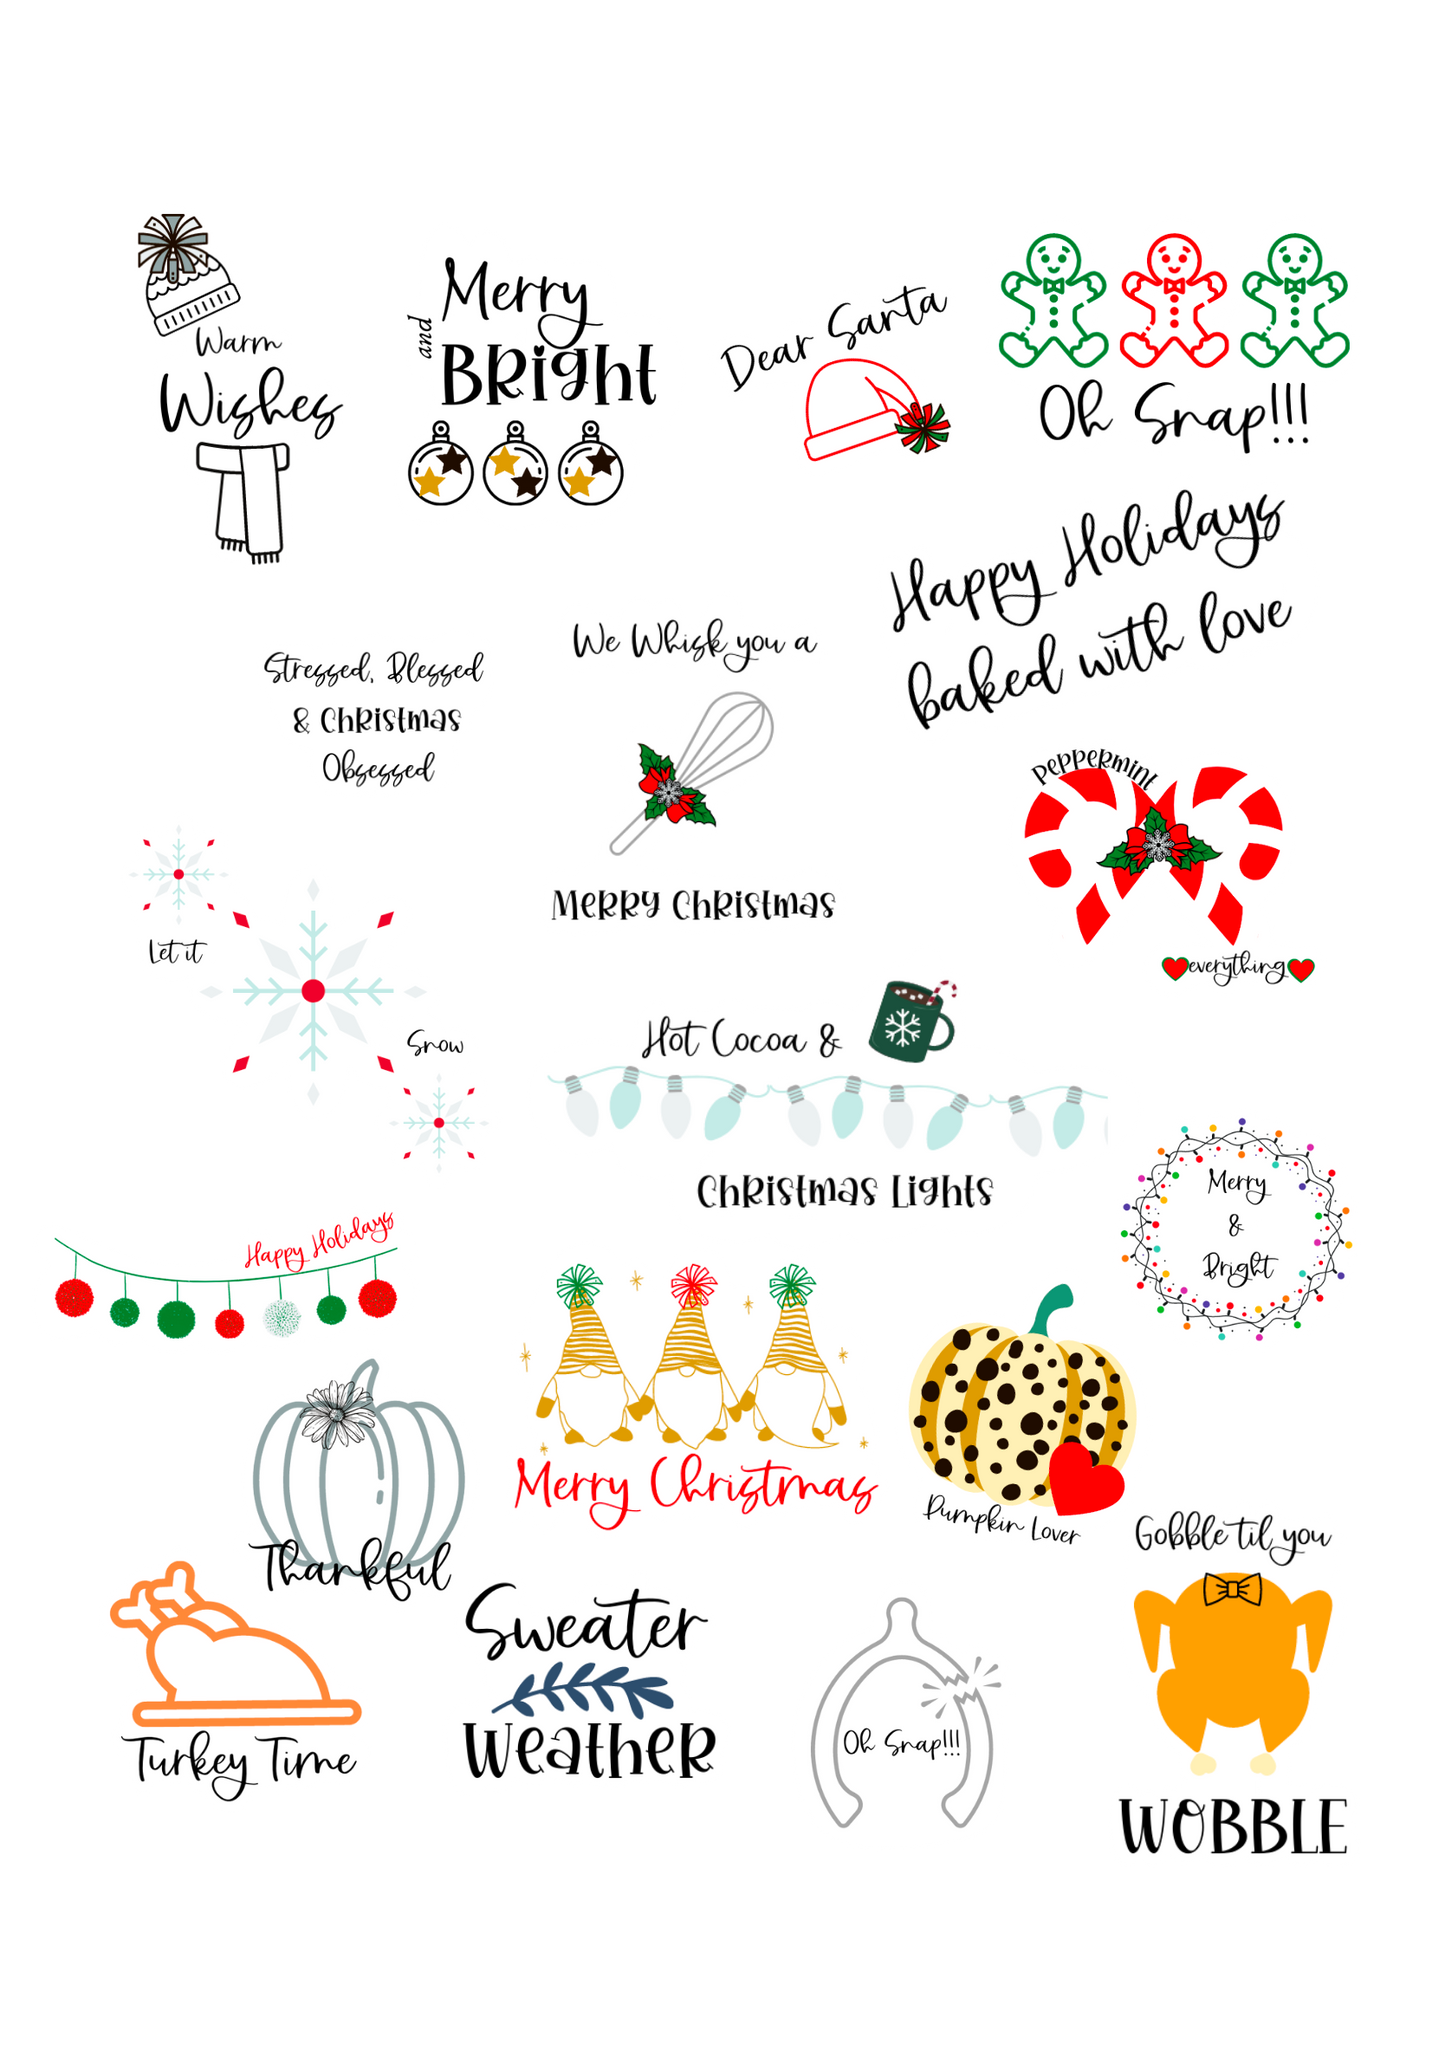 Happy Holiday Print & Cut Stickers